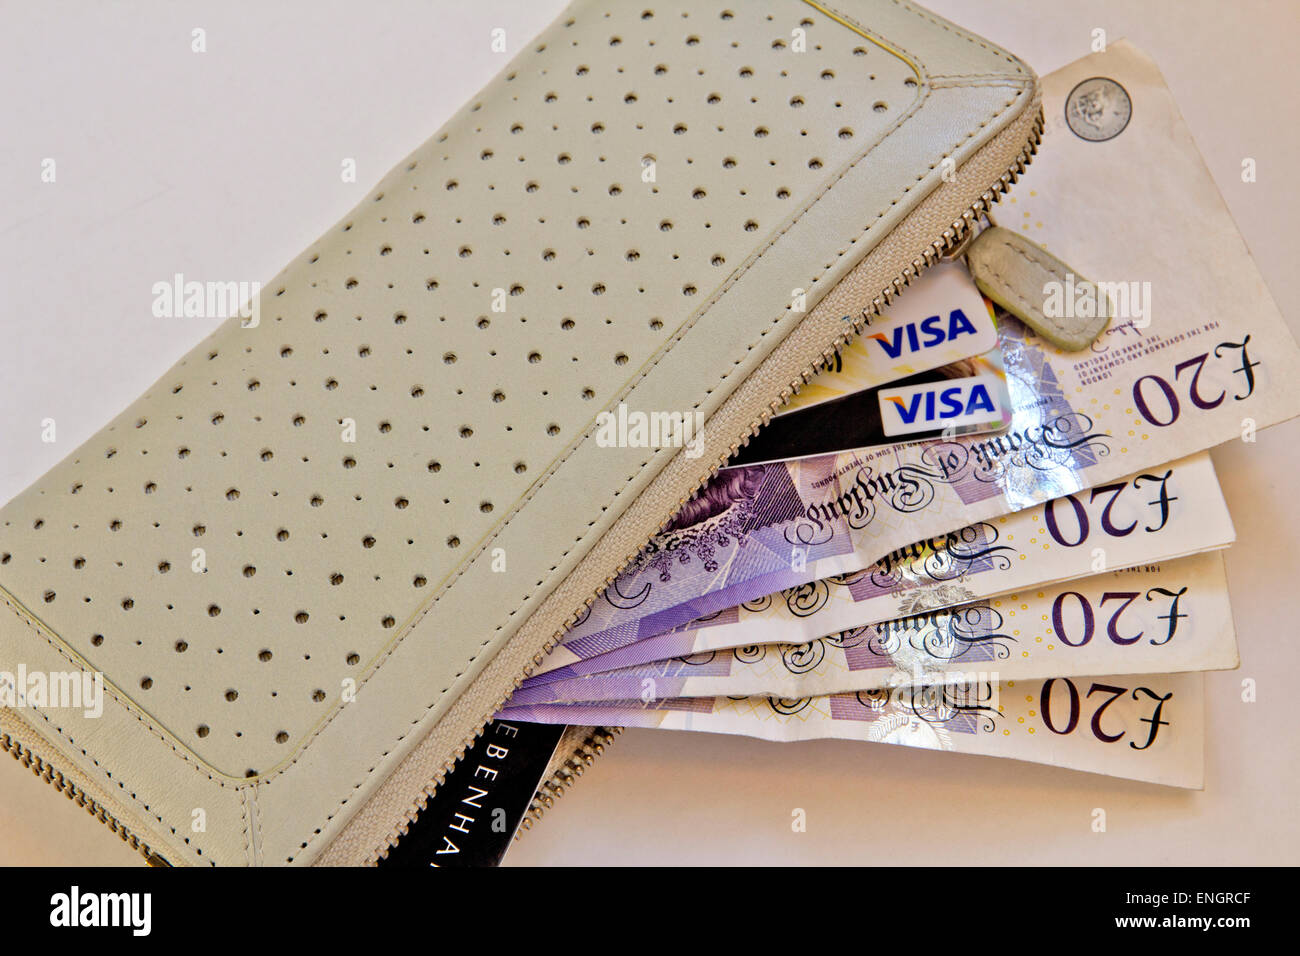 Money, Notes, and Credit Cards spilling from a wallet. Stock Photo